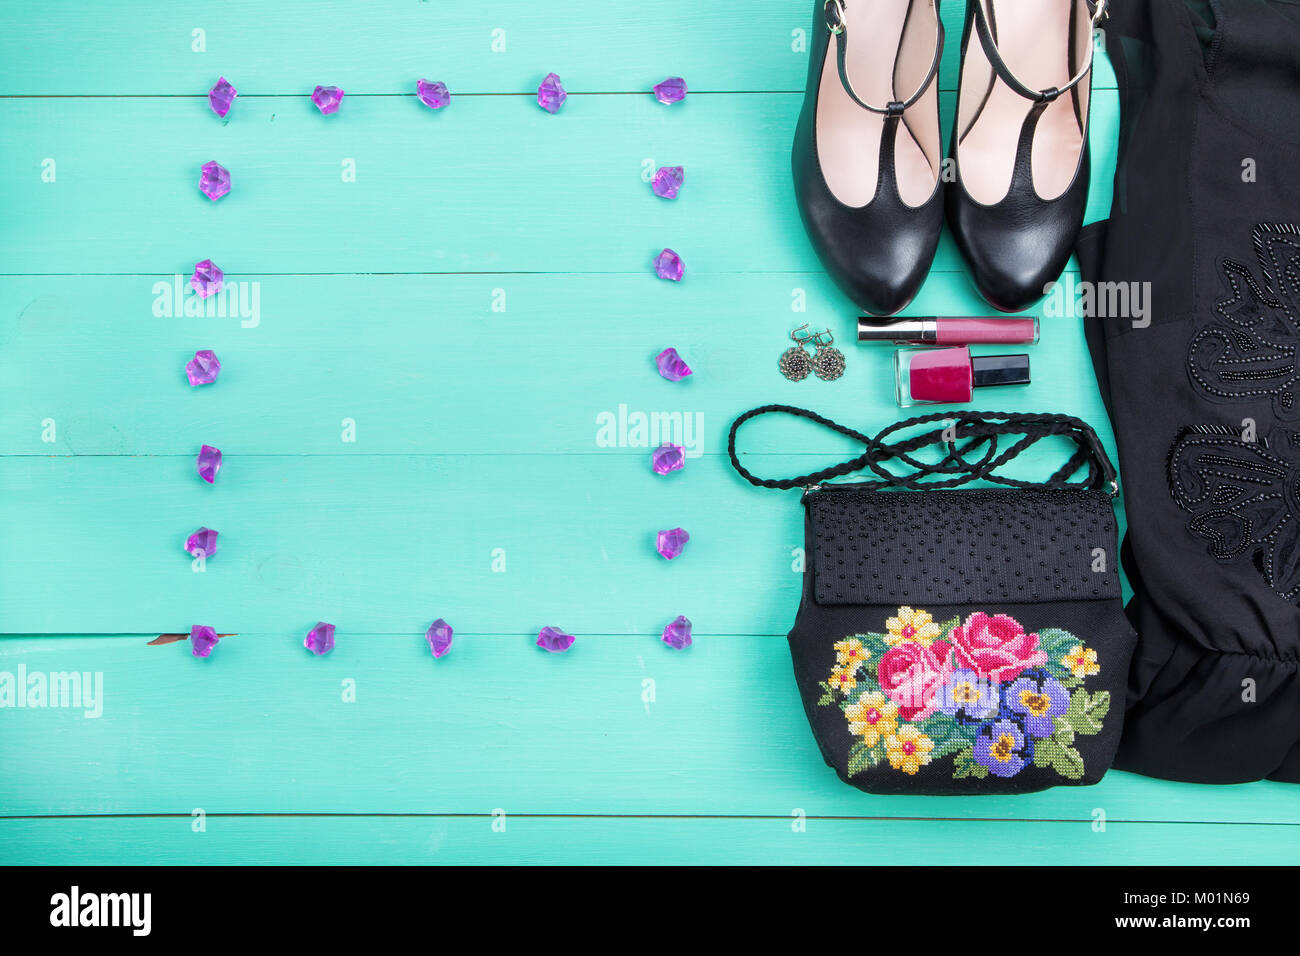 spring clothes, women's clothes - a purple dress, embroidered bag, black heels, earrings, nail polish, lipstick. turquoise wooden background, top view Stock Photo